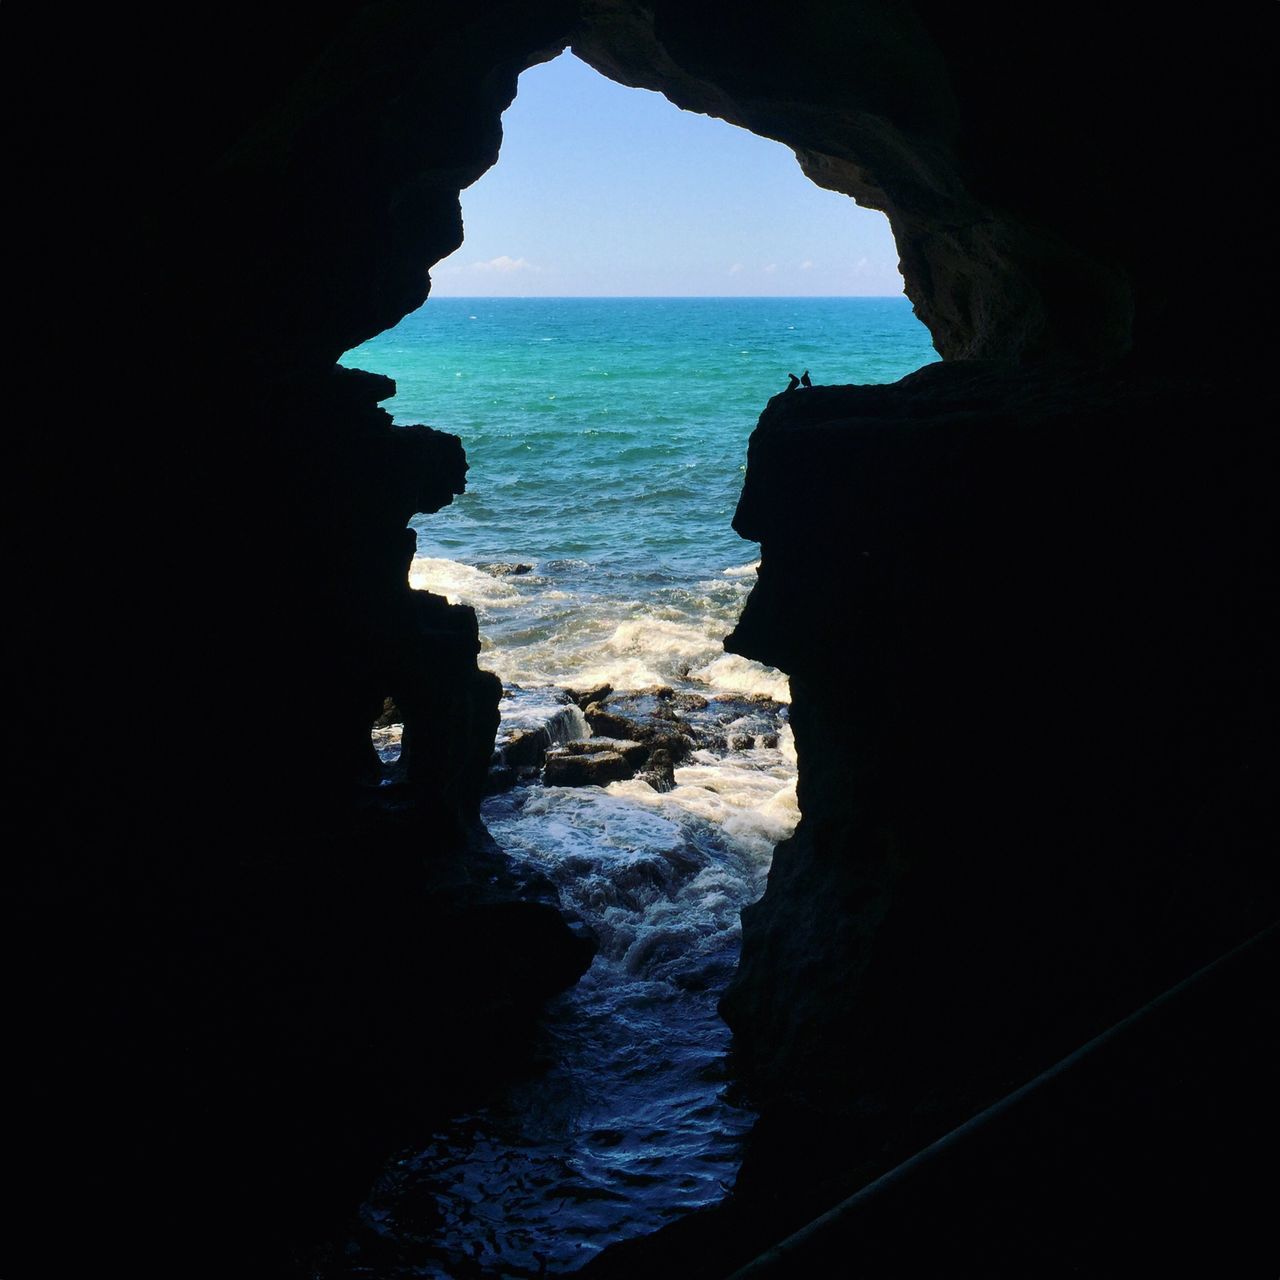 SCENIC VIEW OF SEA AGAINST CLEAR SKY SEEN THROUGH ROCK FORMATION